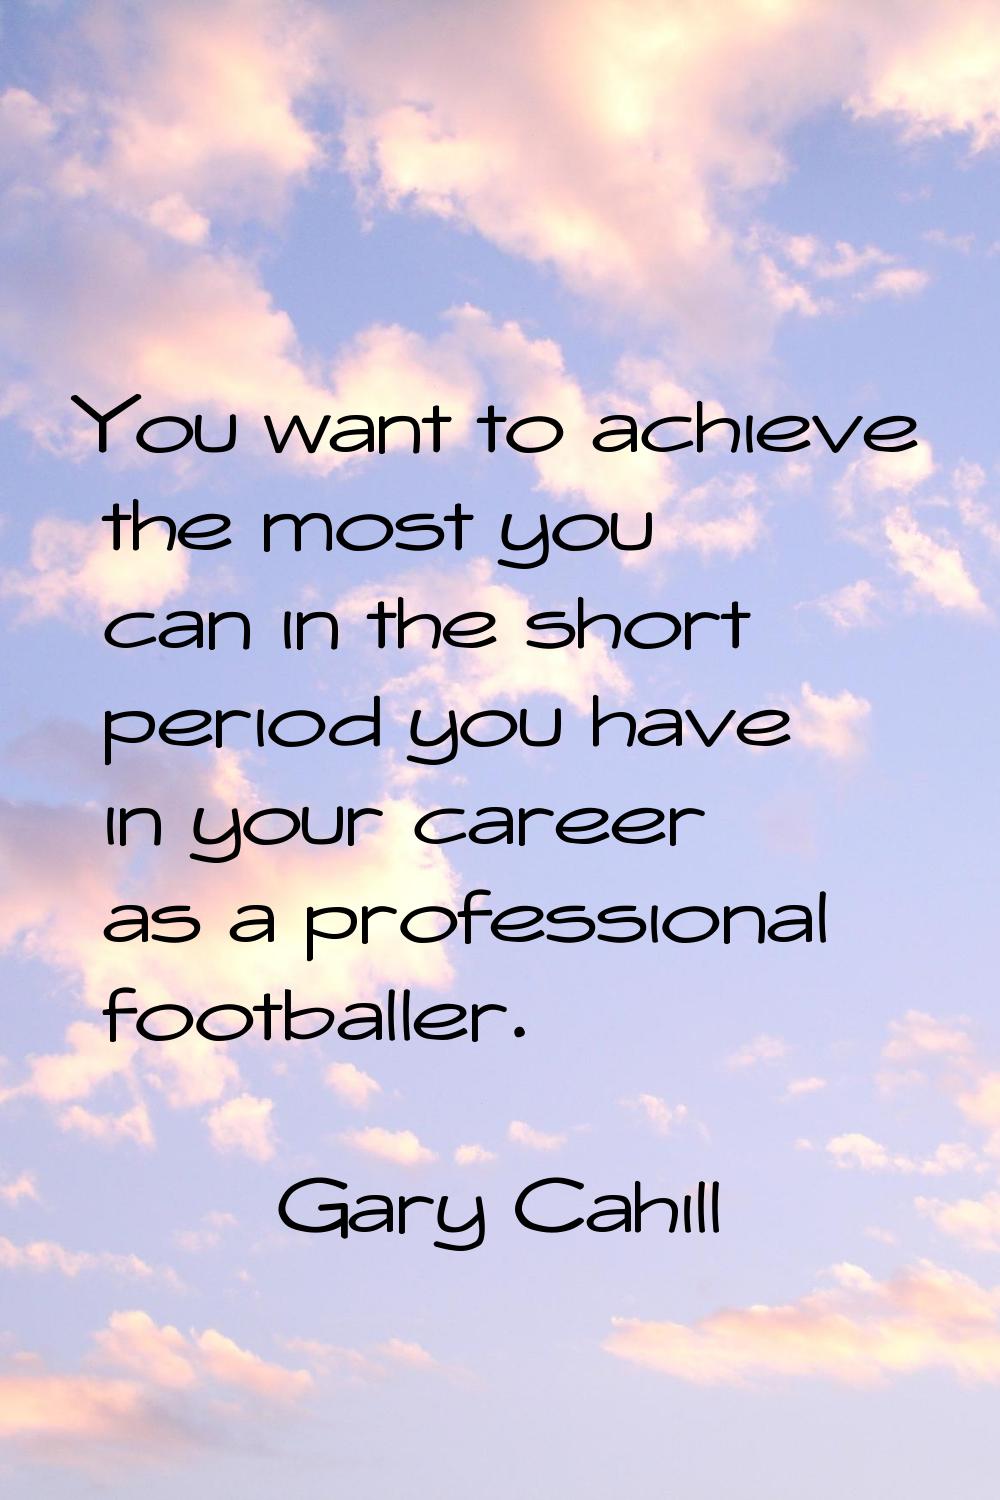 You want to achieve the most you can in the short period you have in your career as a professional 